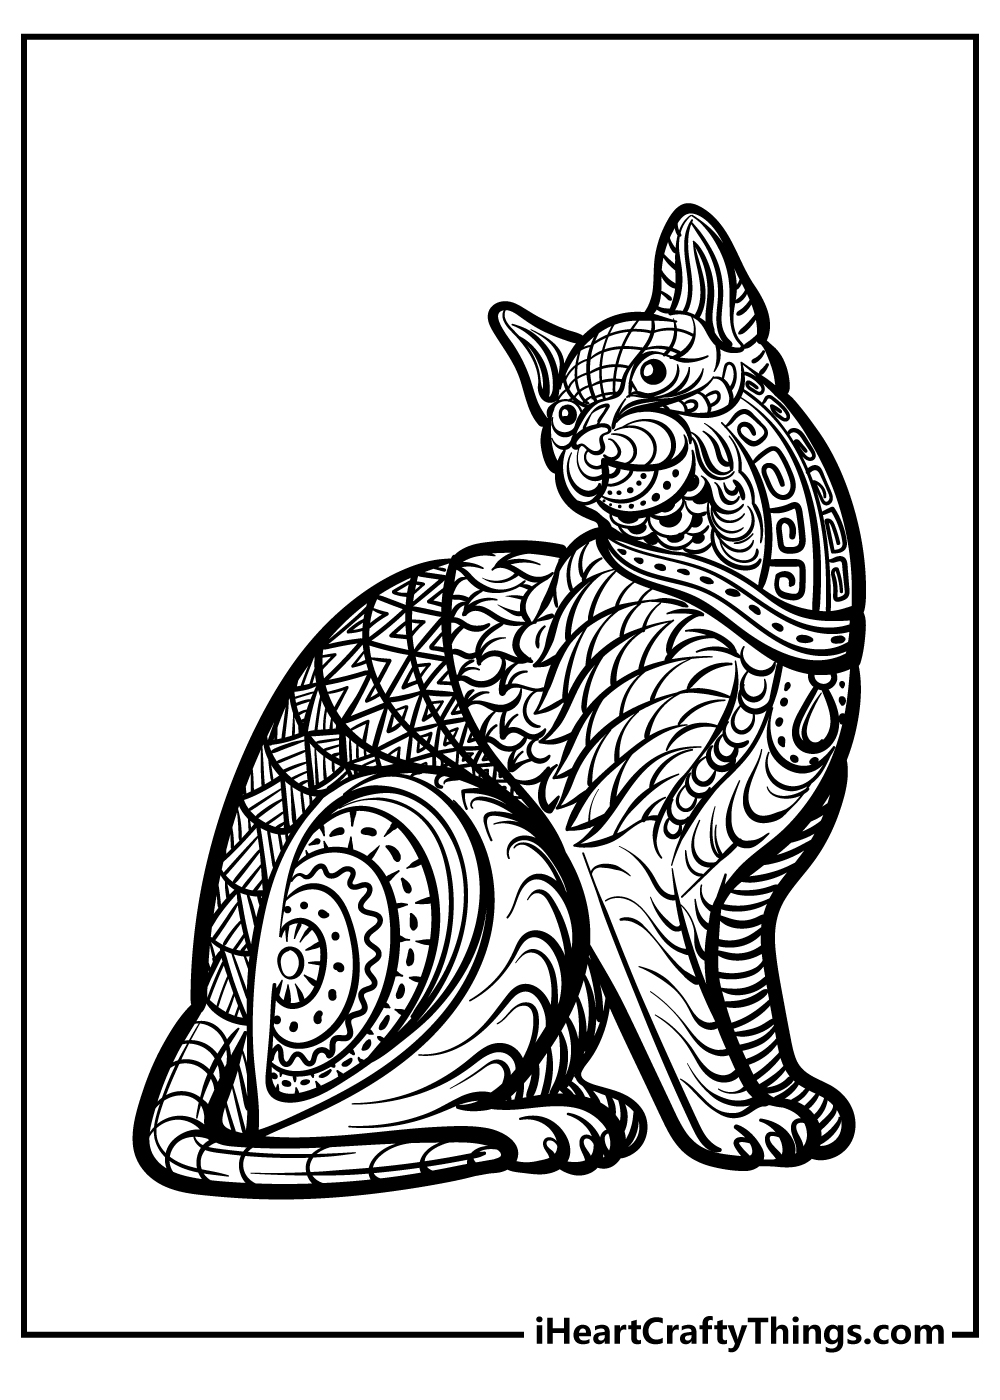 Adult Coloring Pages free printable